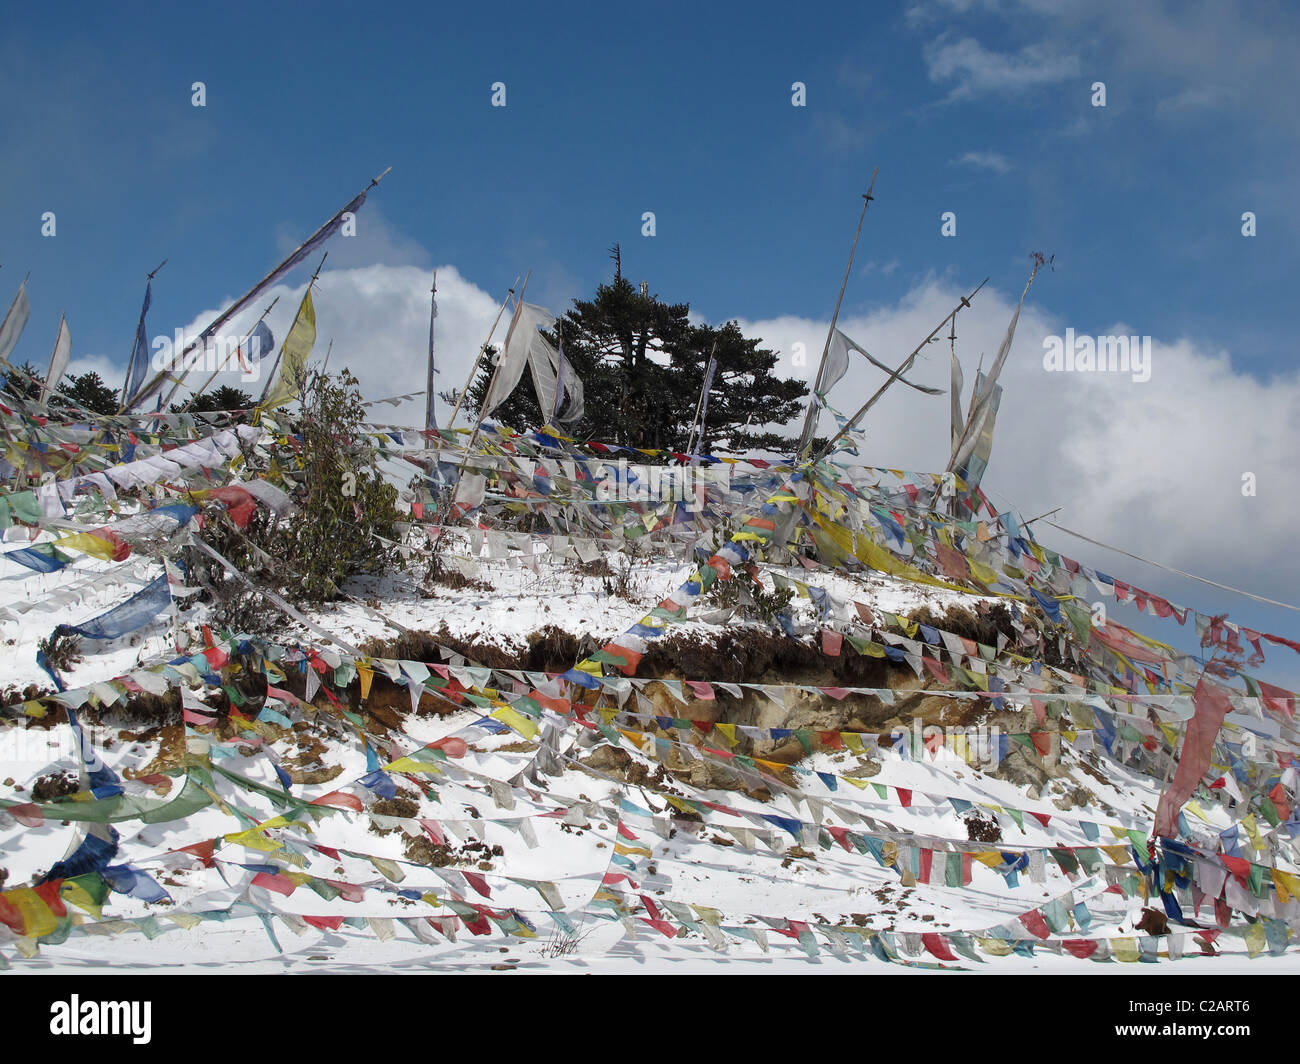 Snow and prayer flags at Thrumshingla Pass, the border between central and eastern Bhutan Stock Photo